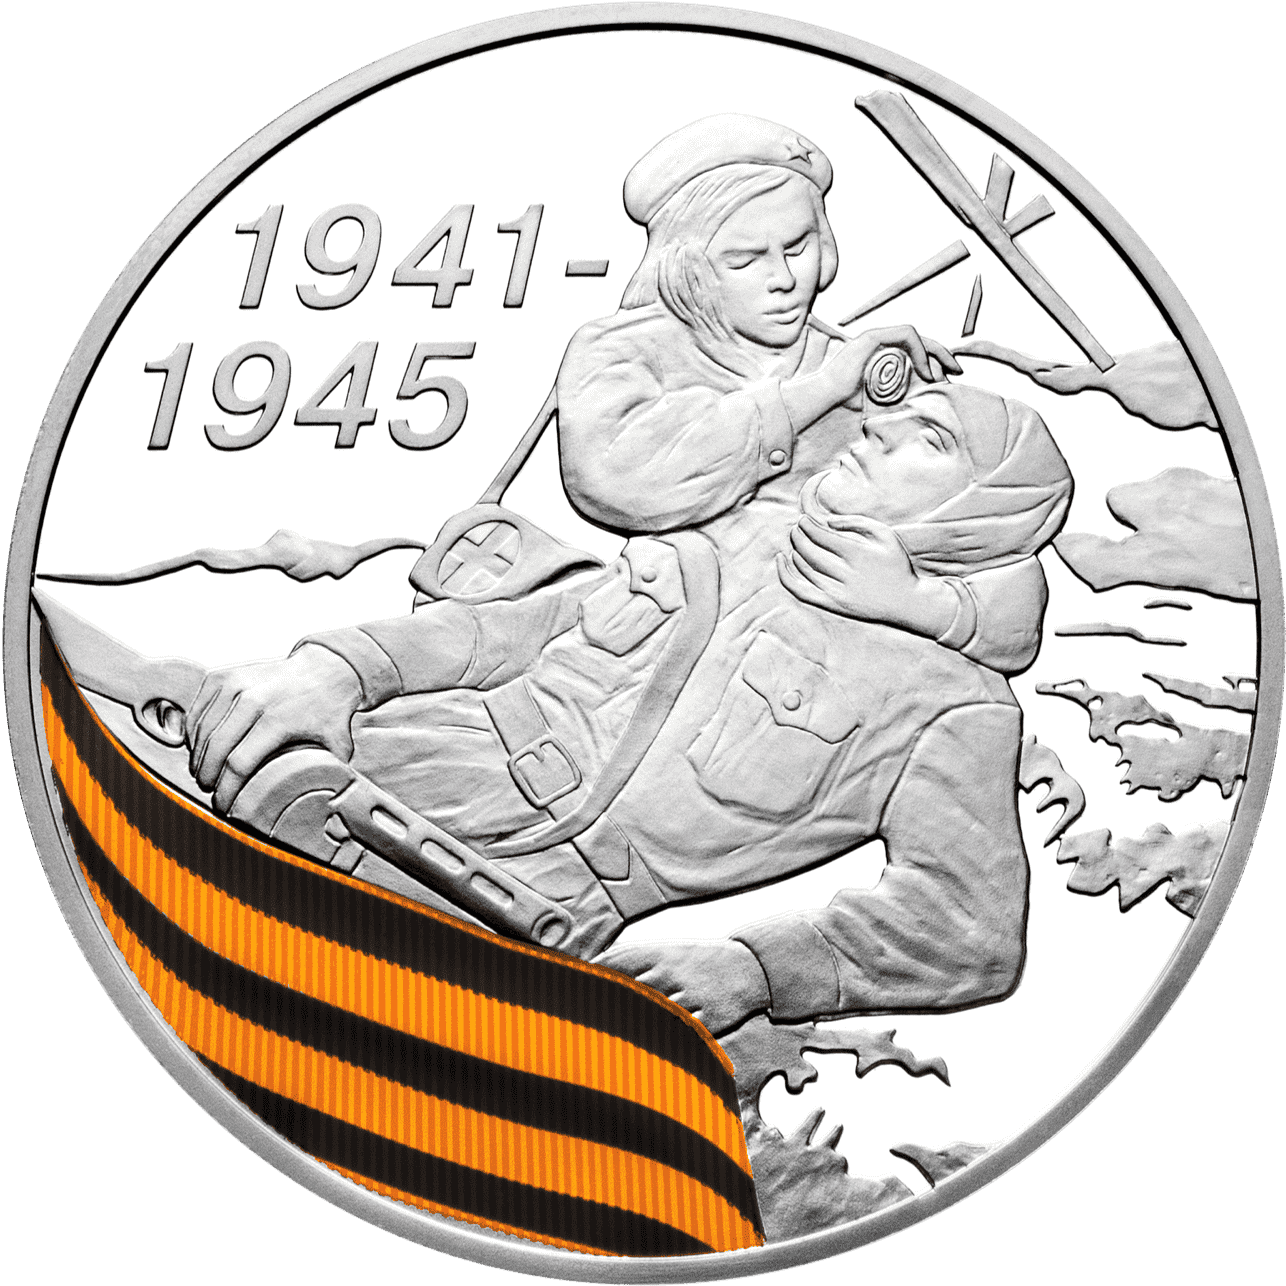 The Bank of Russia Museum virtual coin exhibition